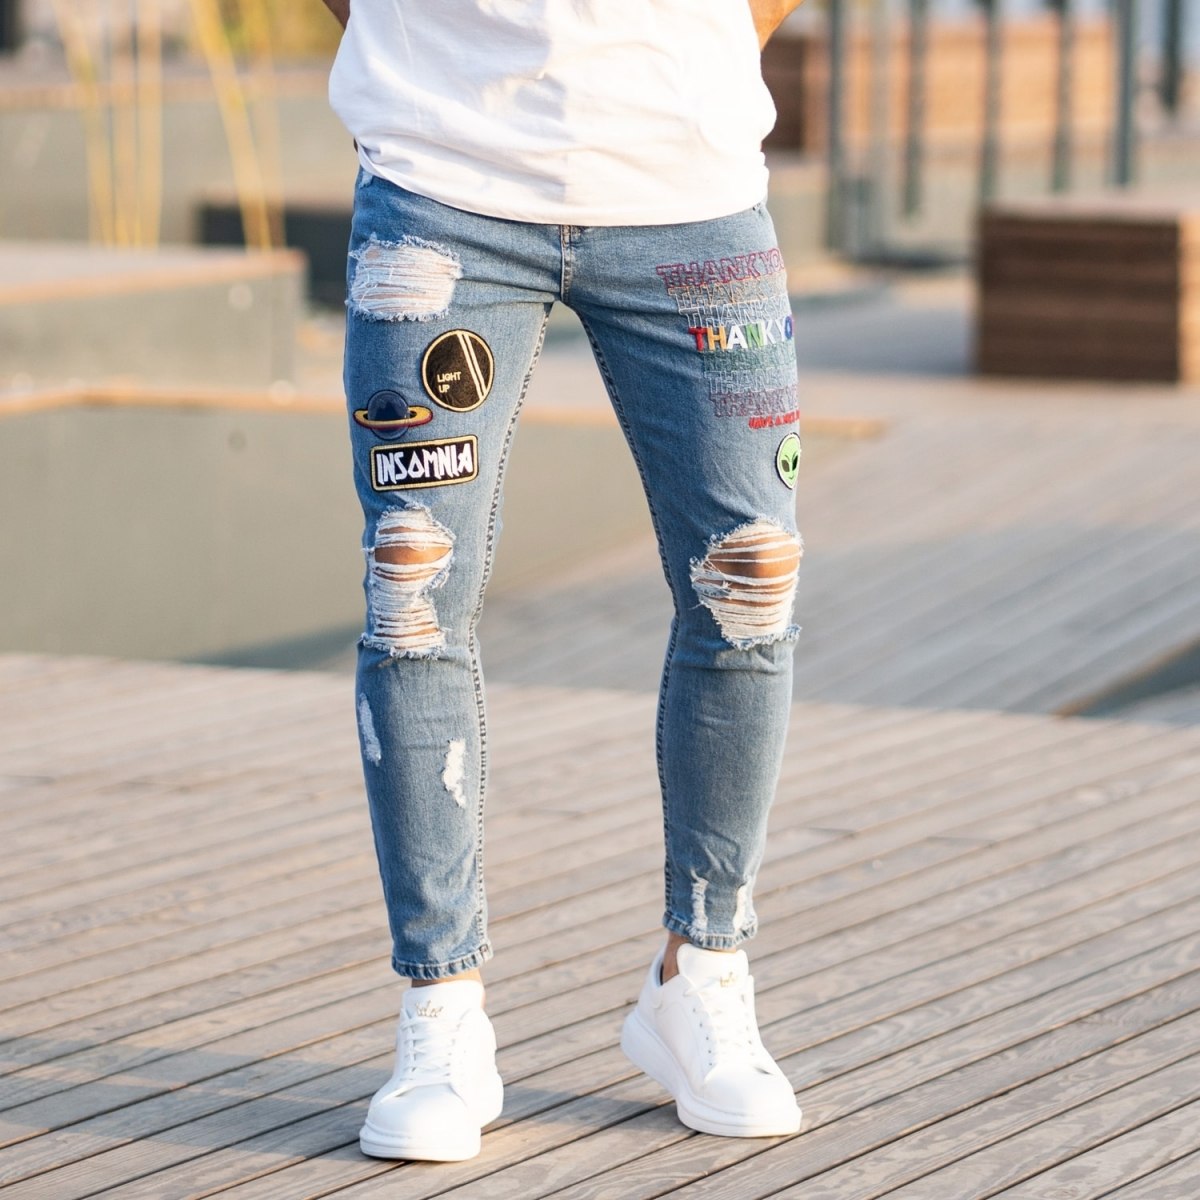 Men's Stylish Patchworked Jeans